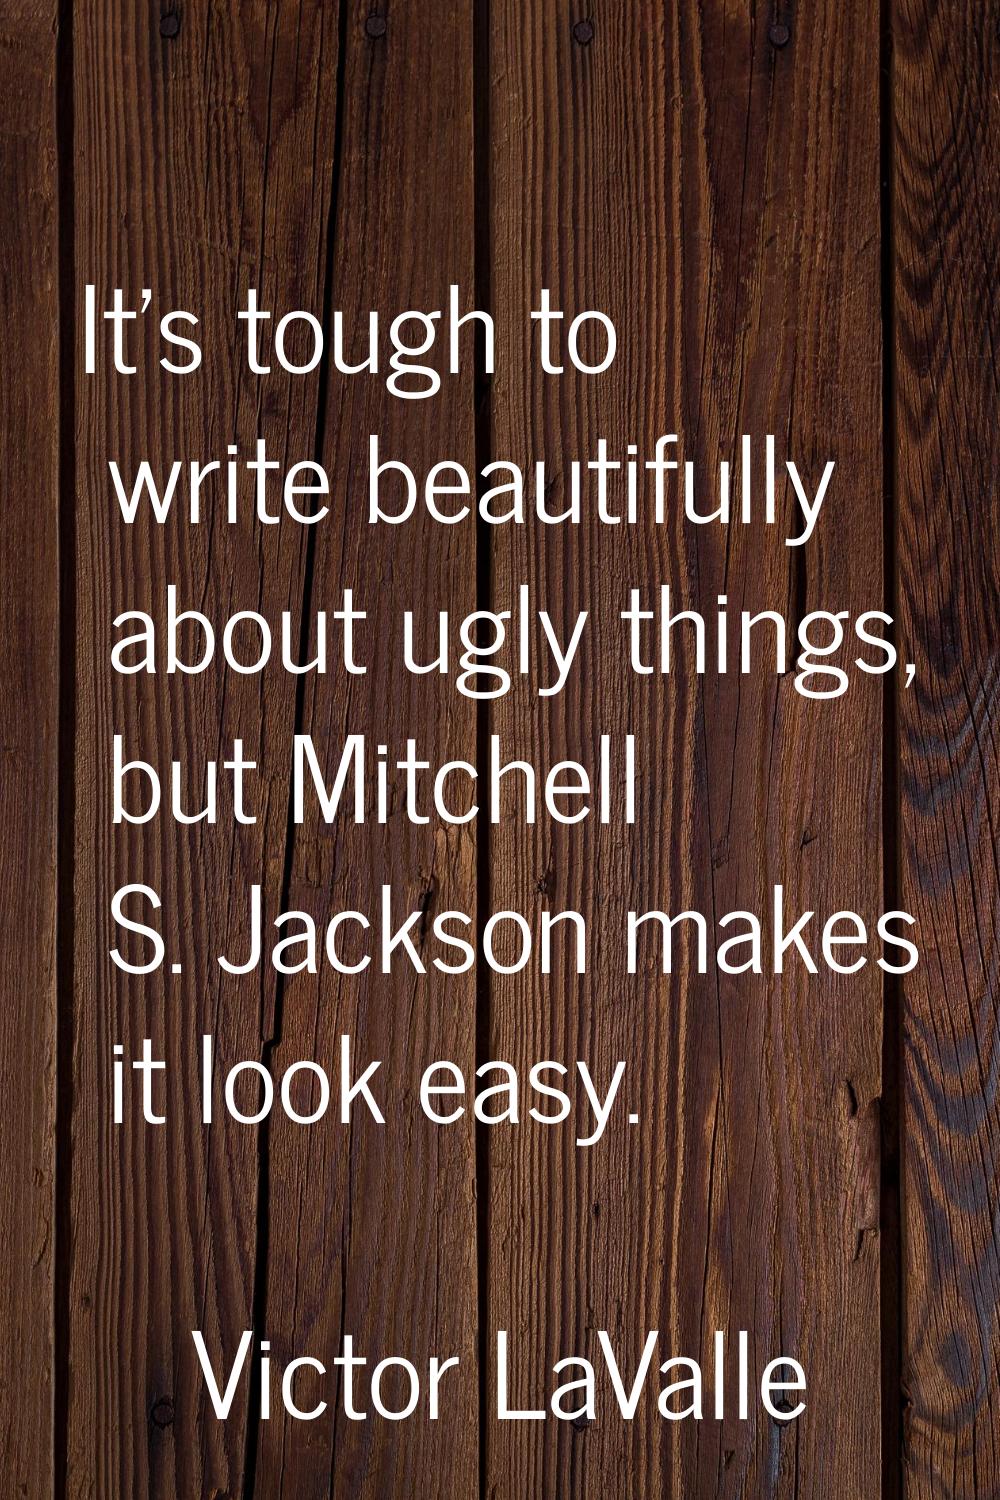 It's tough to write beautifully about ugly things, but Mitchell S. Jackson makes it look easy.